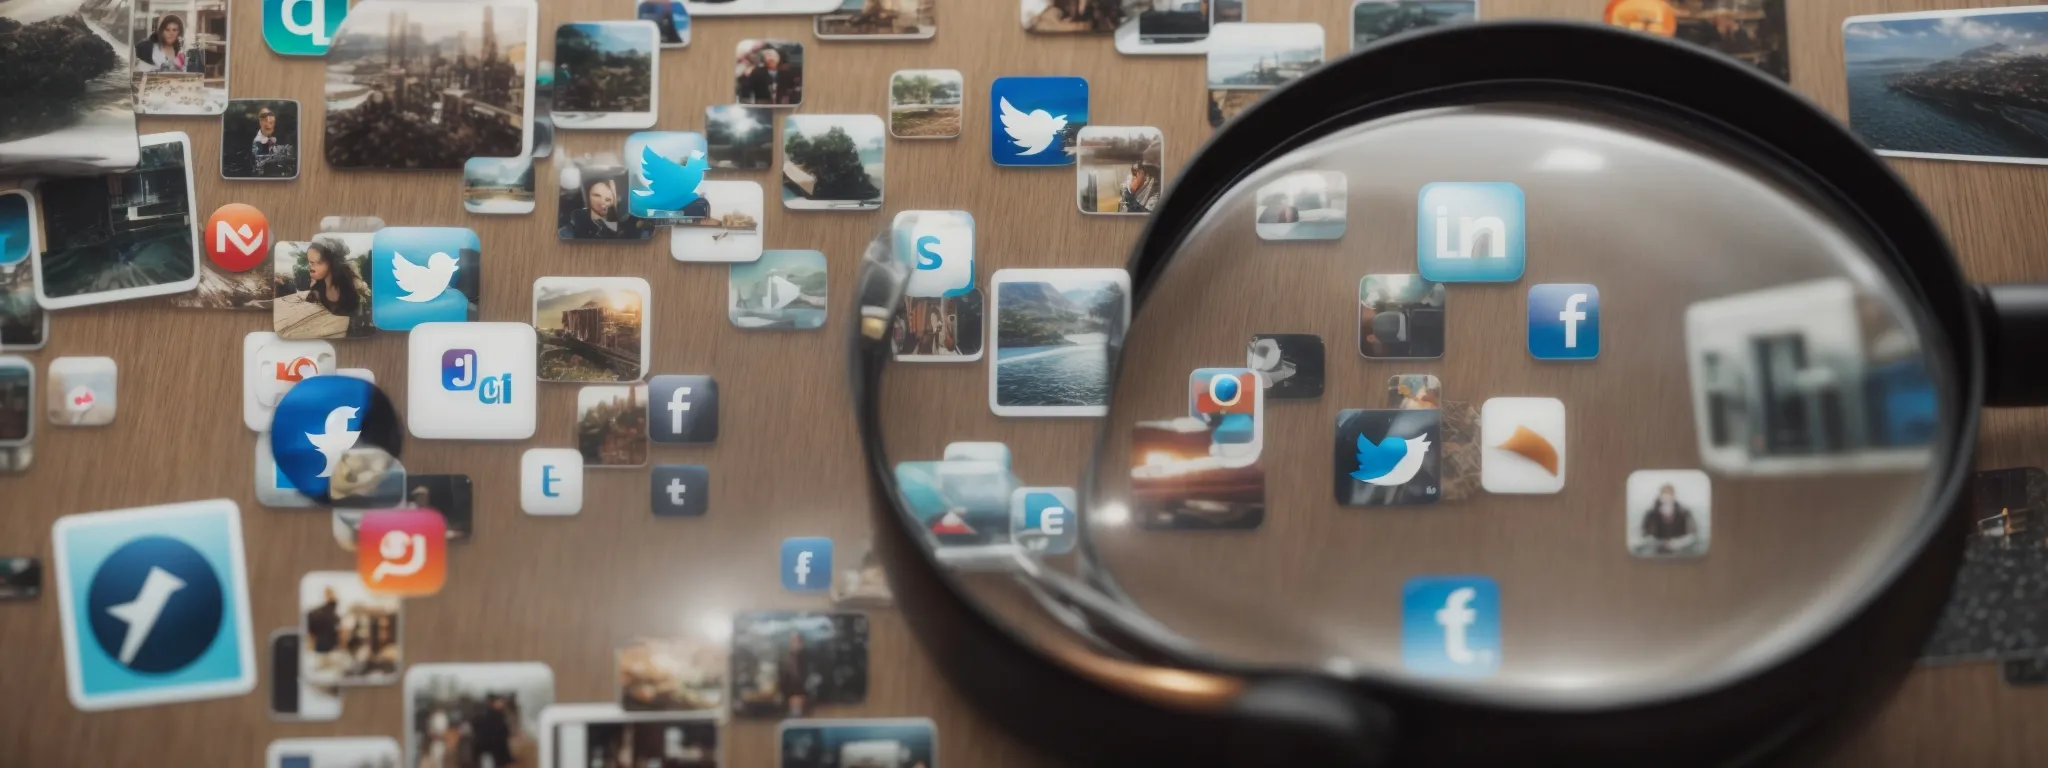 social media icons reflecting off the surface of a magnifying glass positioned over a web search bar.